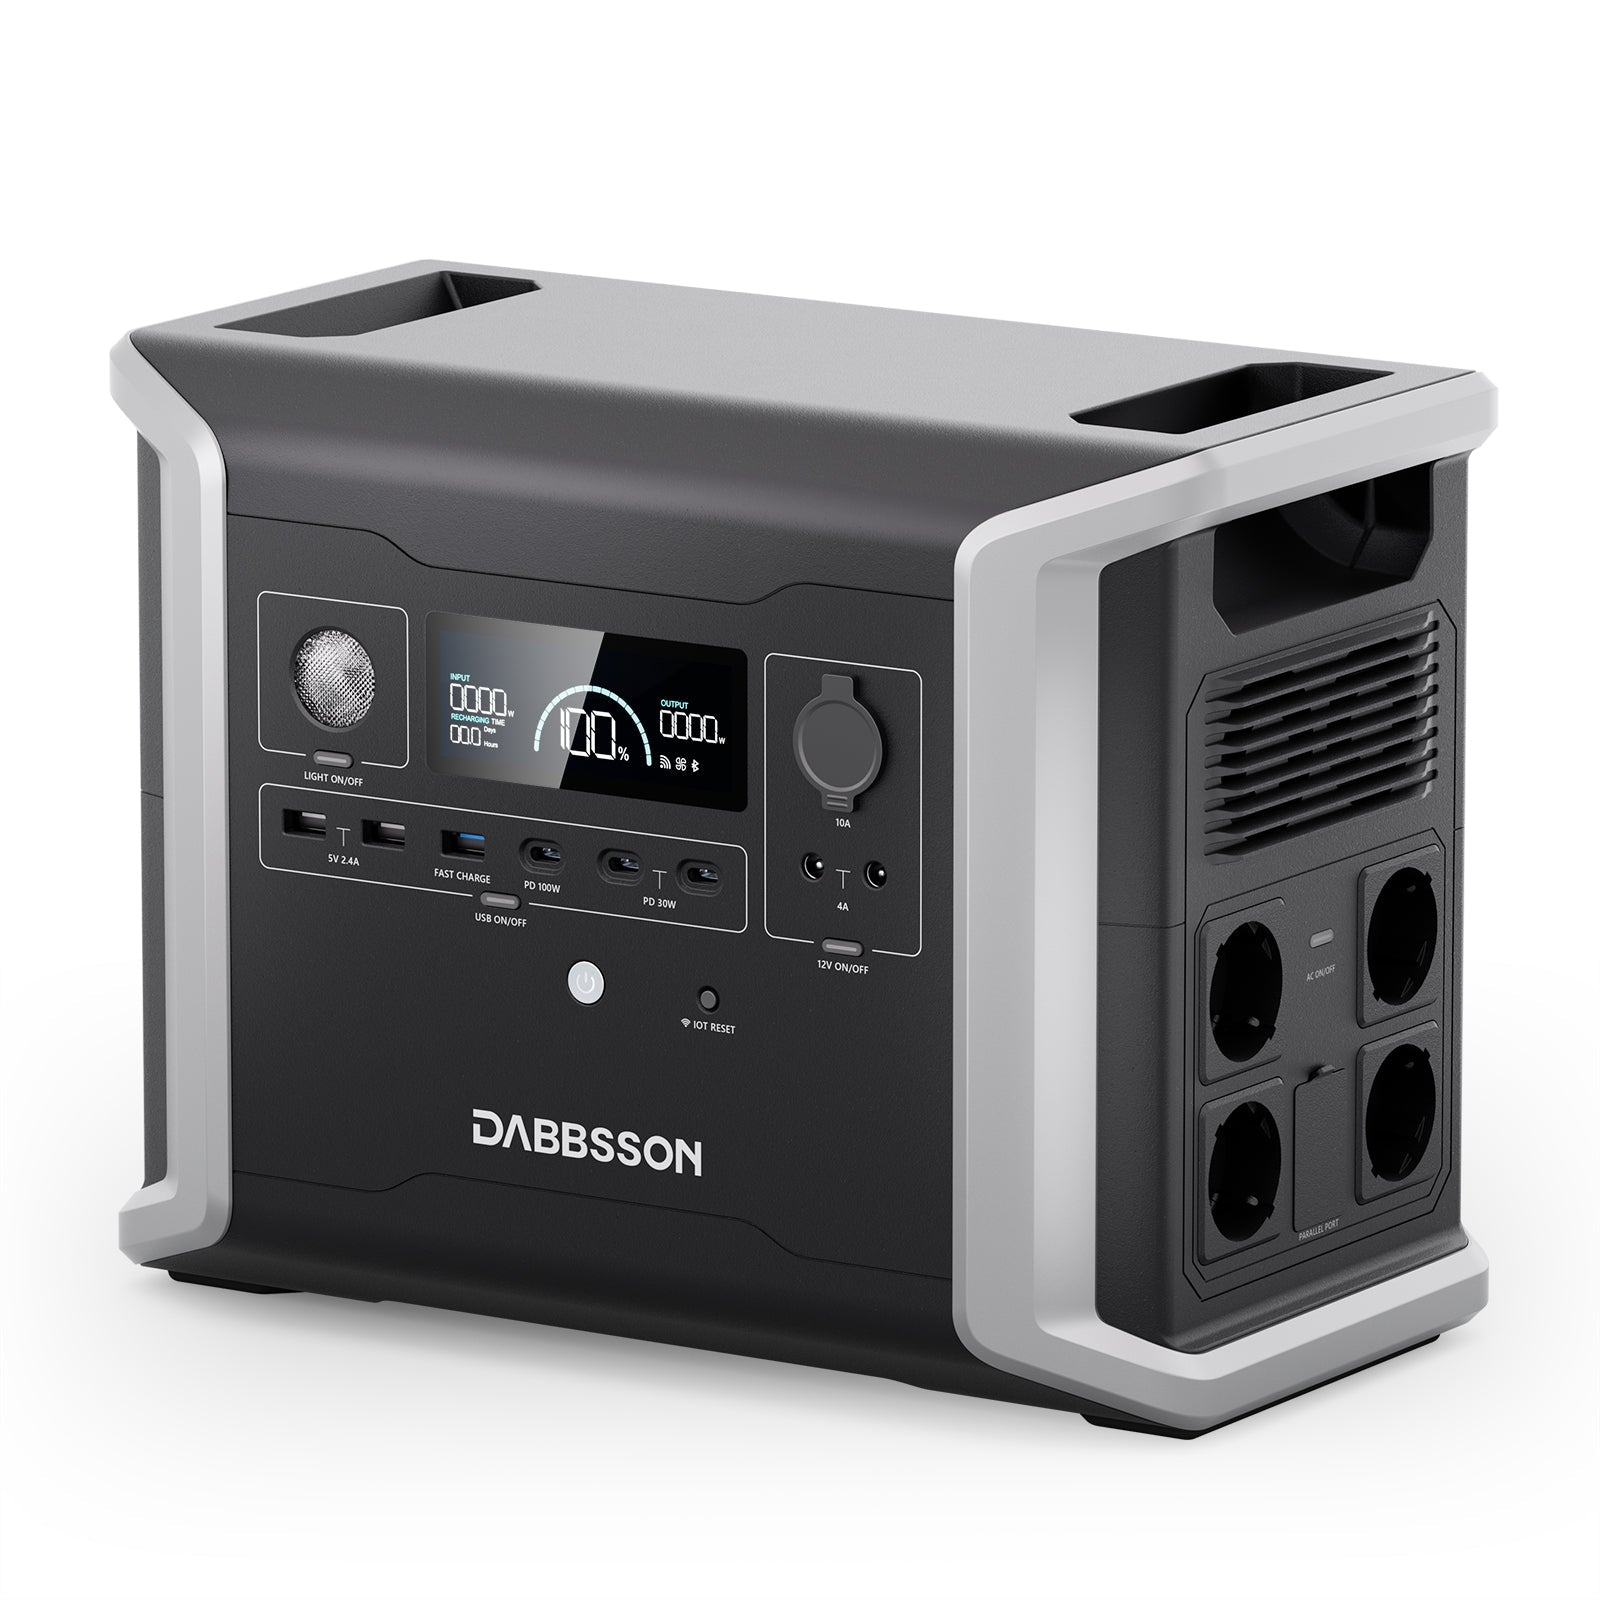 Dabbsson DBS1300 Solargenerator - 1330Wh | 1200W